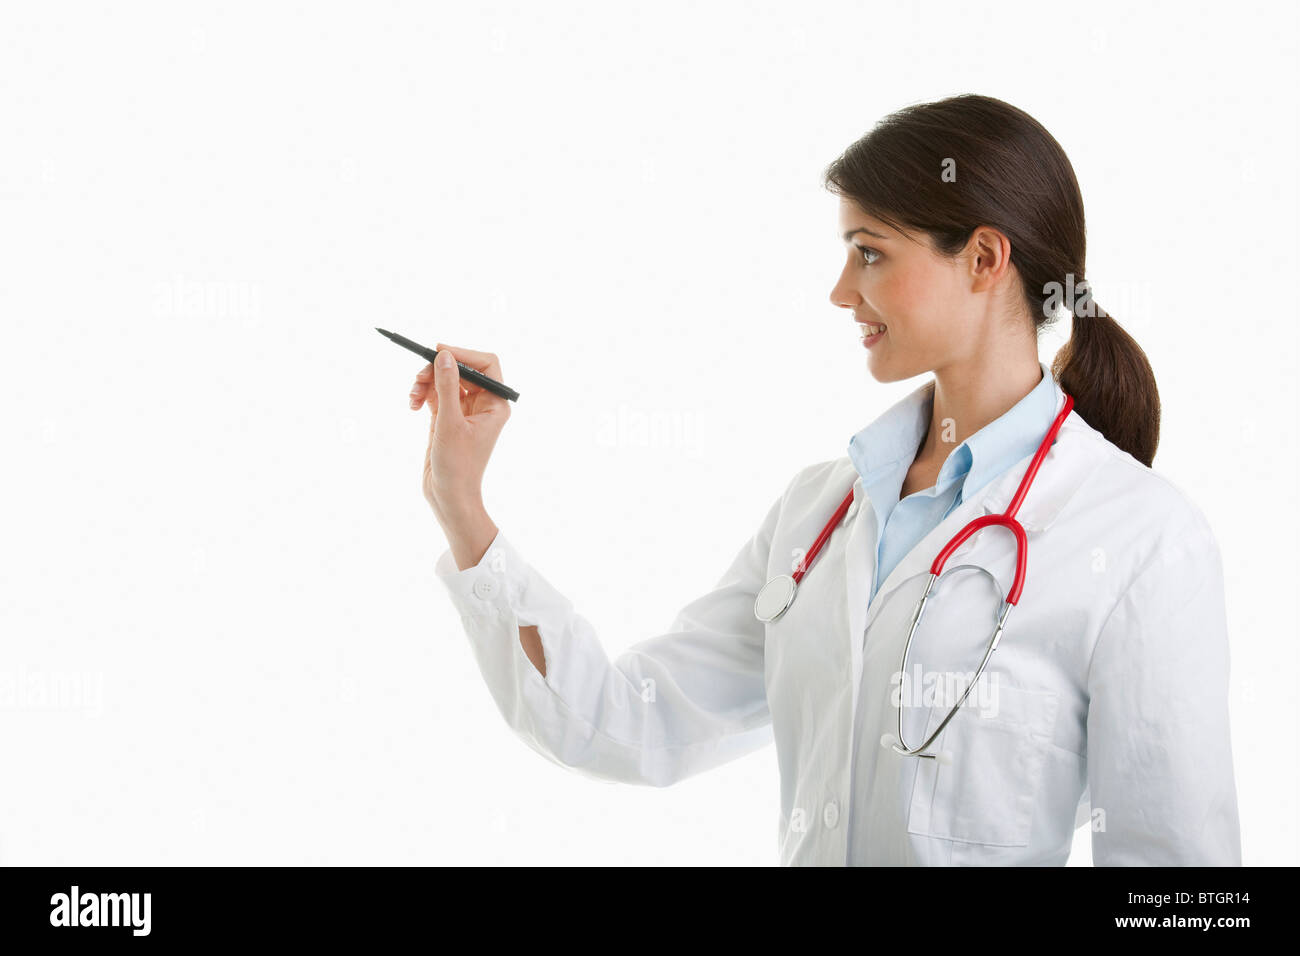 Doctor writing with pen Stock Photo